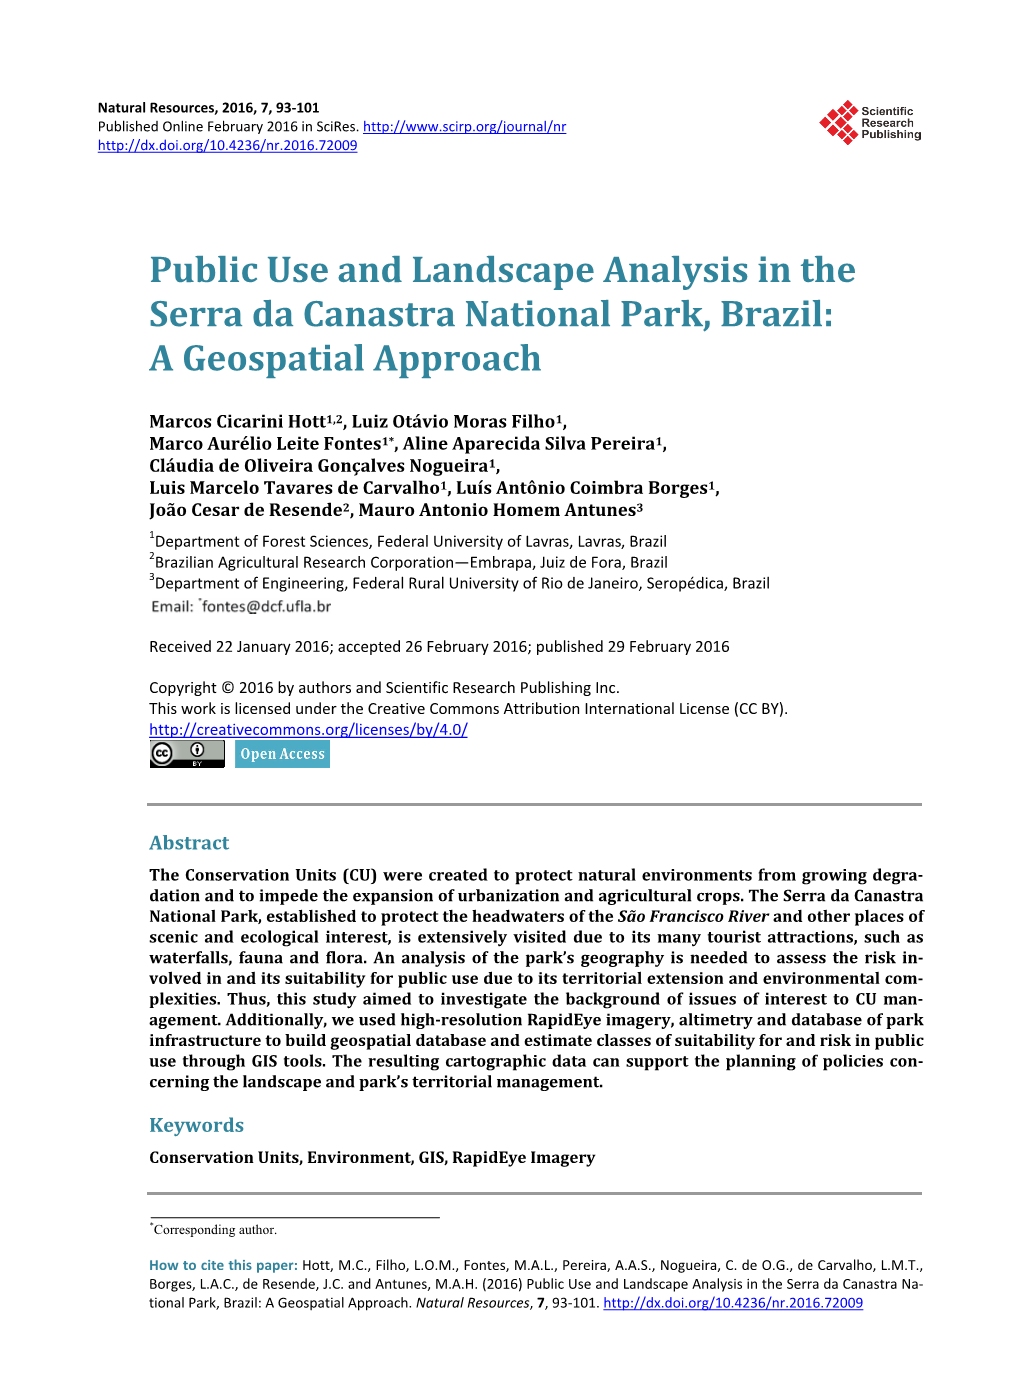 Public Use and Landscape Analysis in the Serra Da Canastra National Park, Brazil: a Geospatial Approach